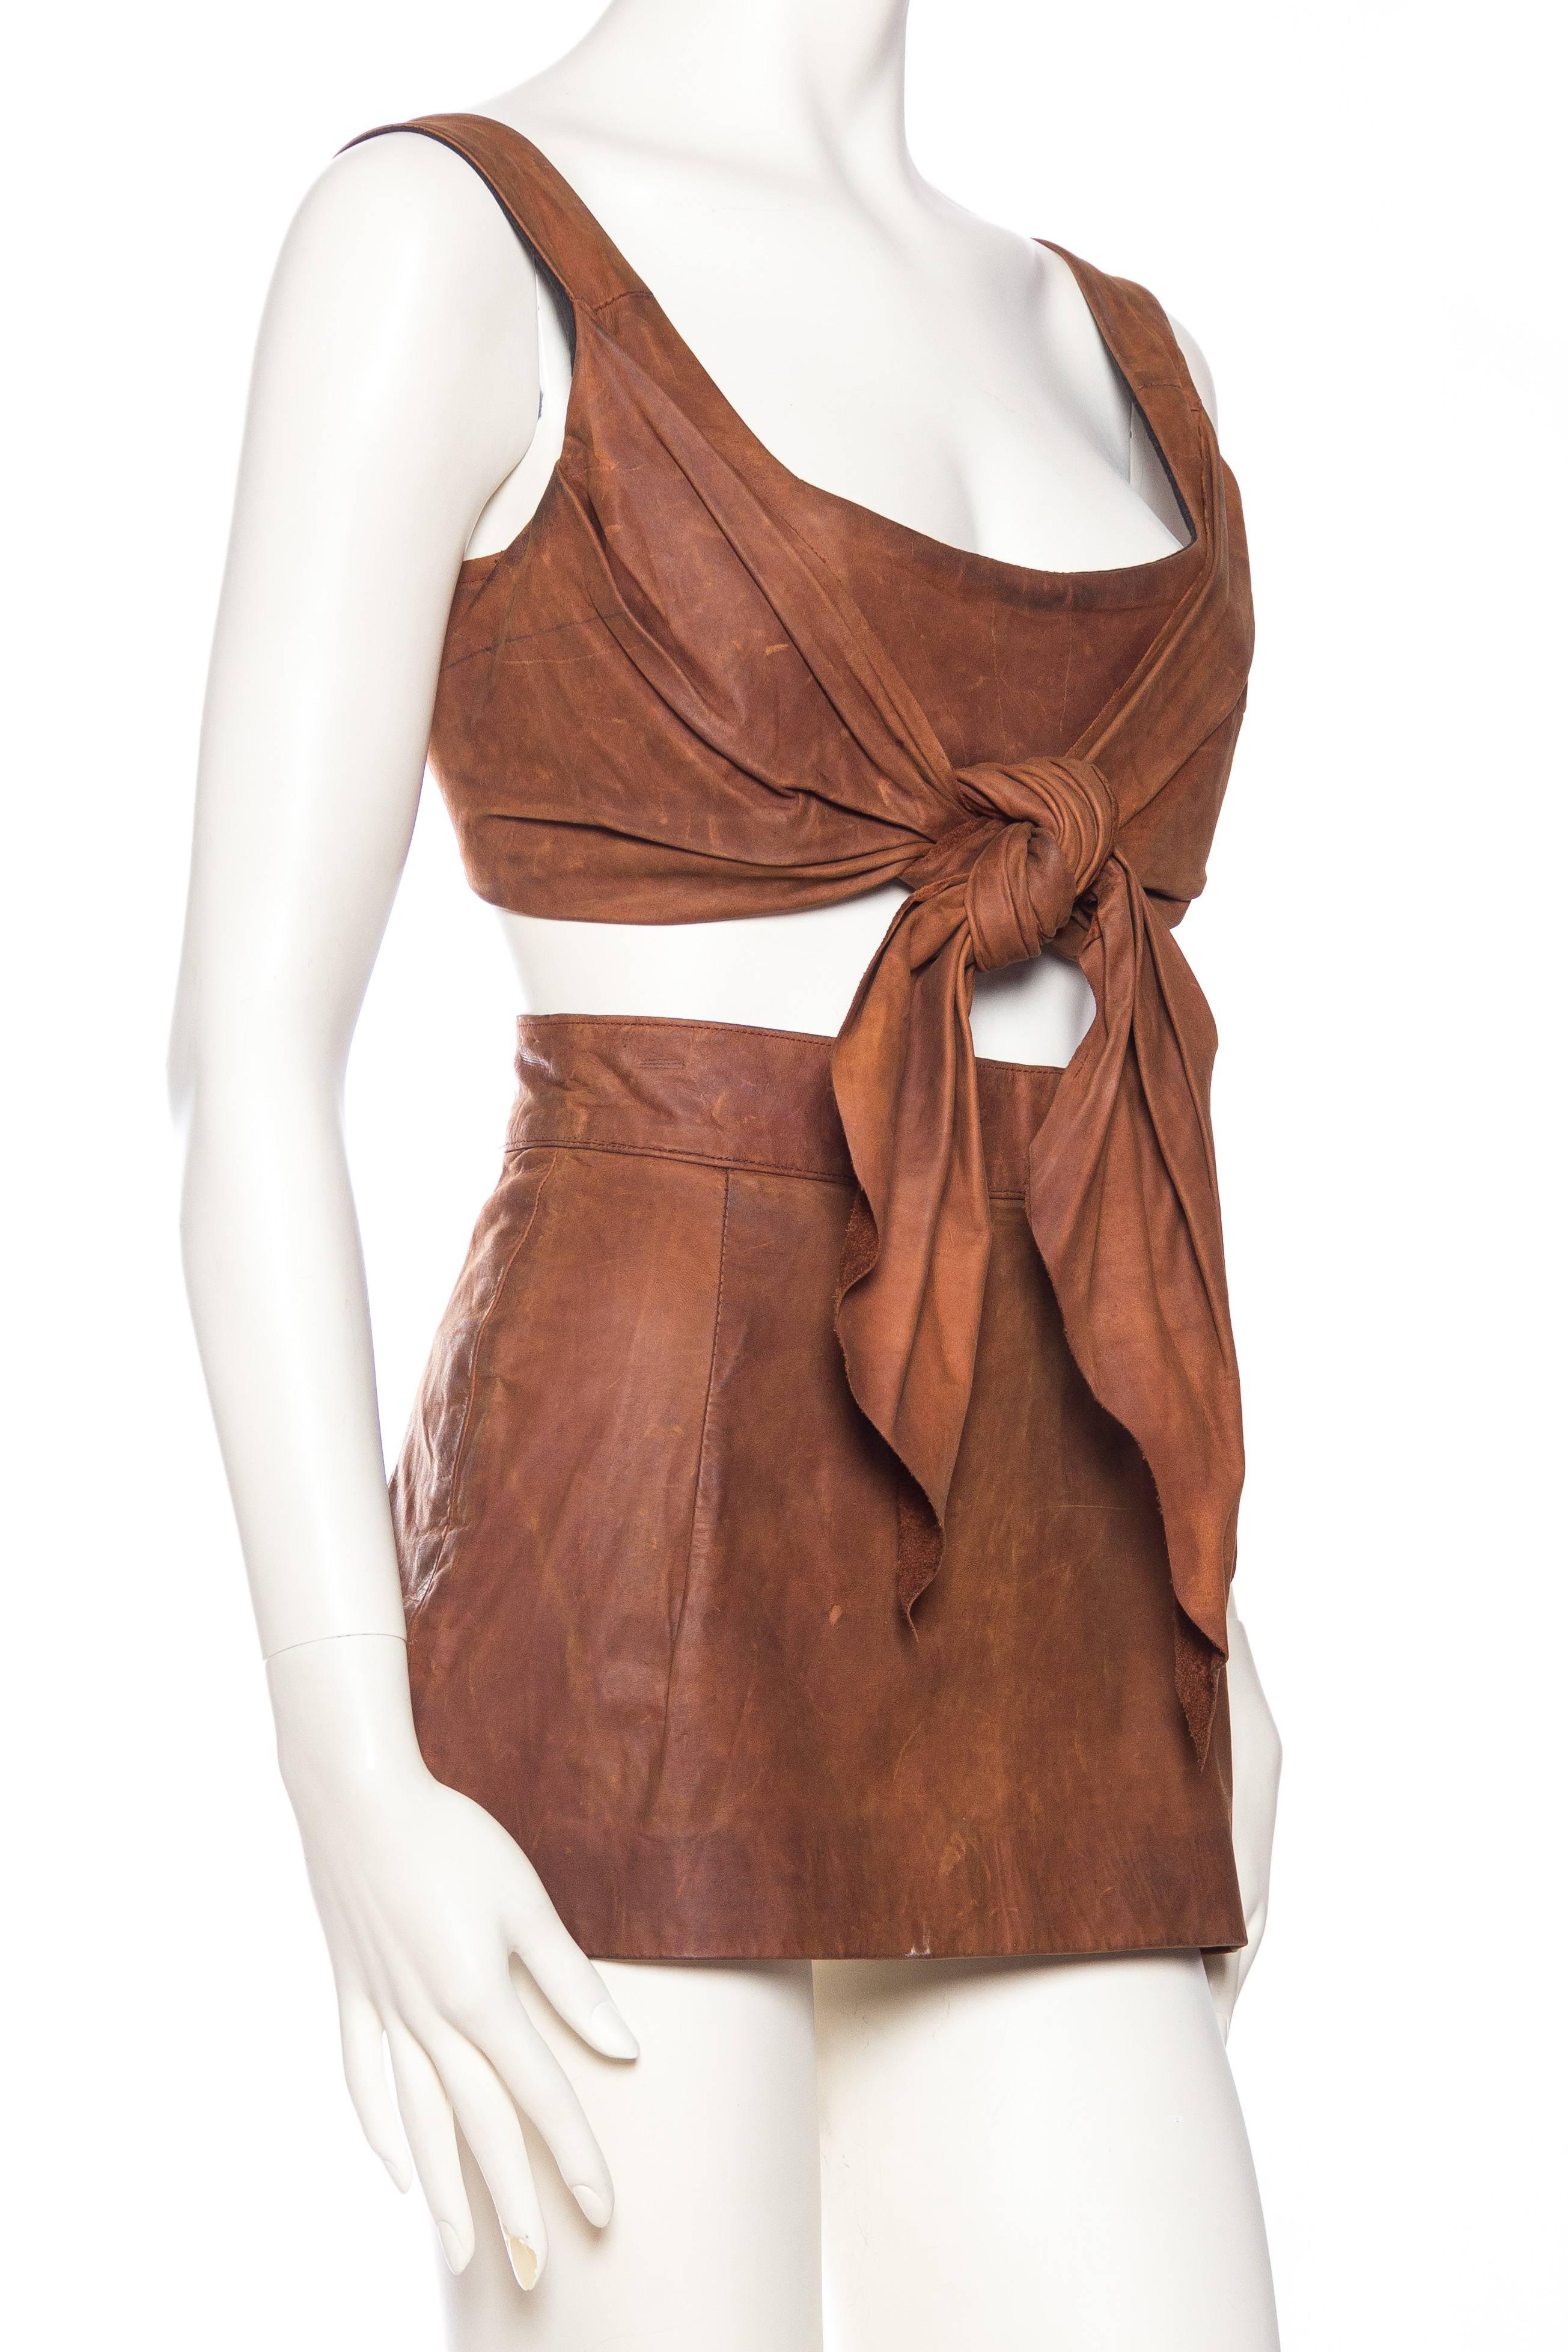 Brown Vivienne Westwood Leather Corset Top and Skirt, 1990s 